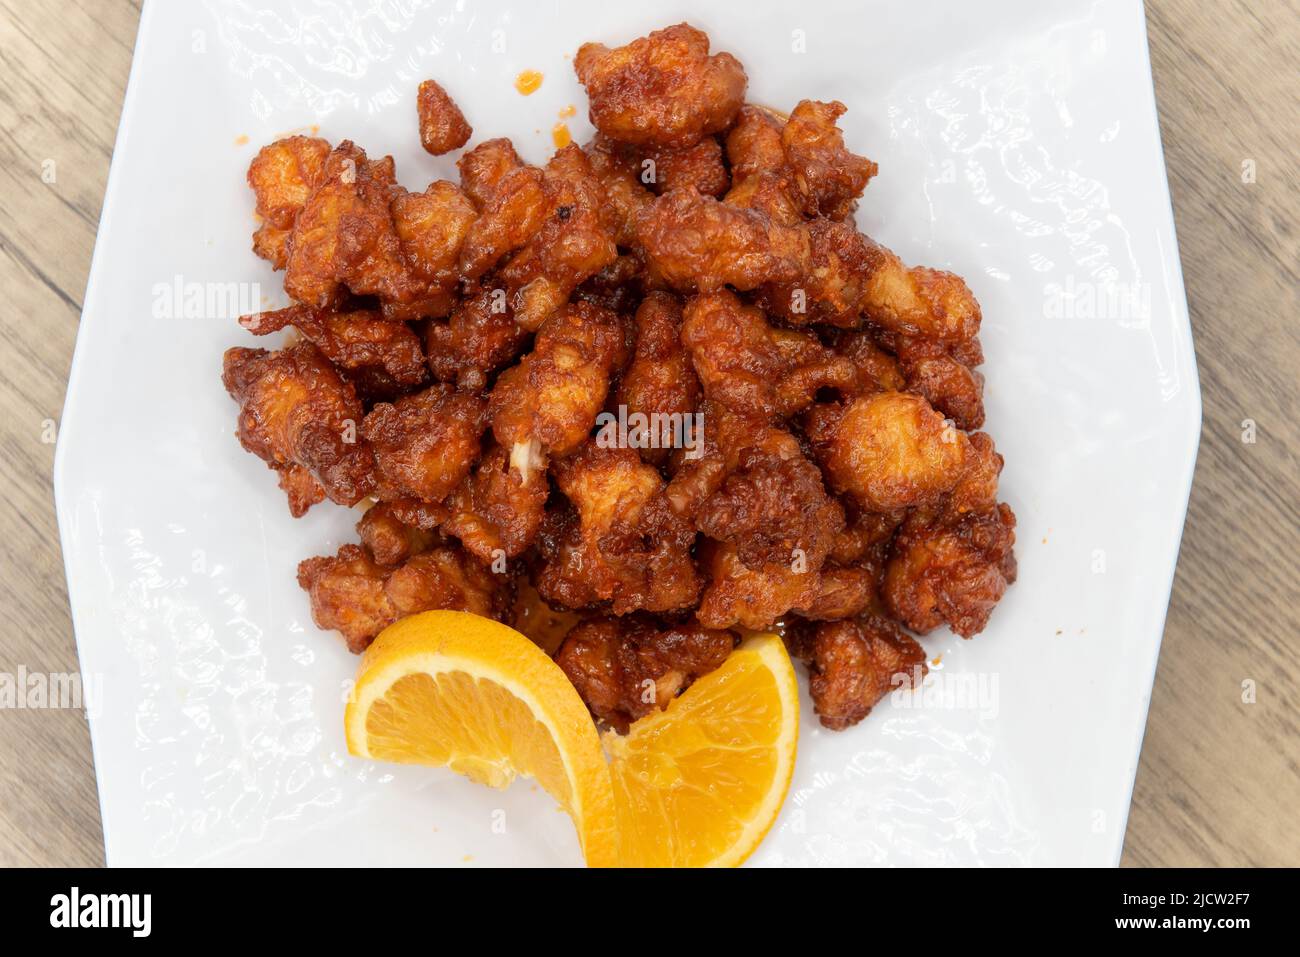 Overhead view of tangy orange chicken piled high with crispy crunchy pieces and ready to eat. Stock Photo